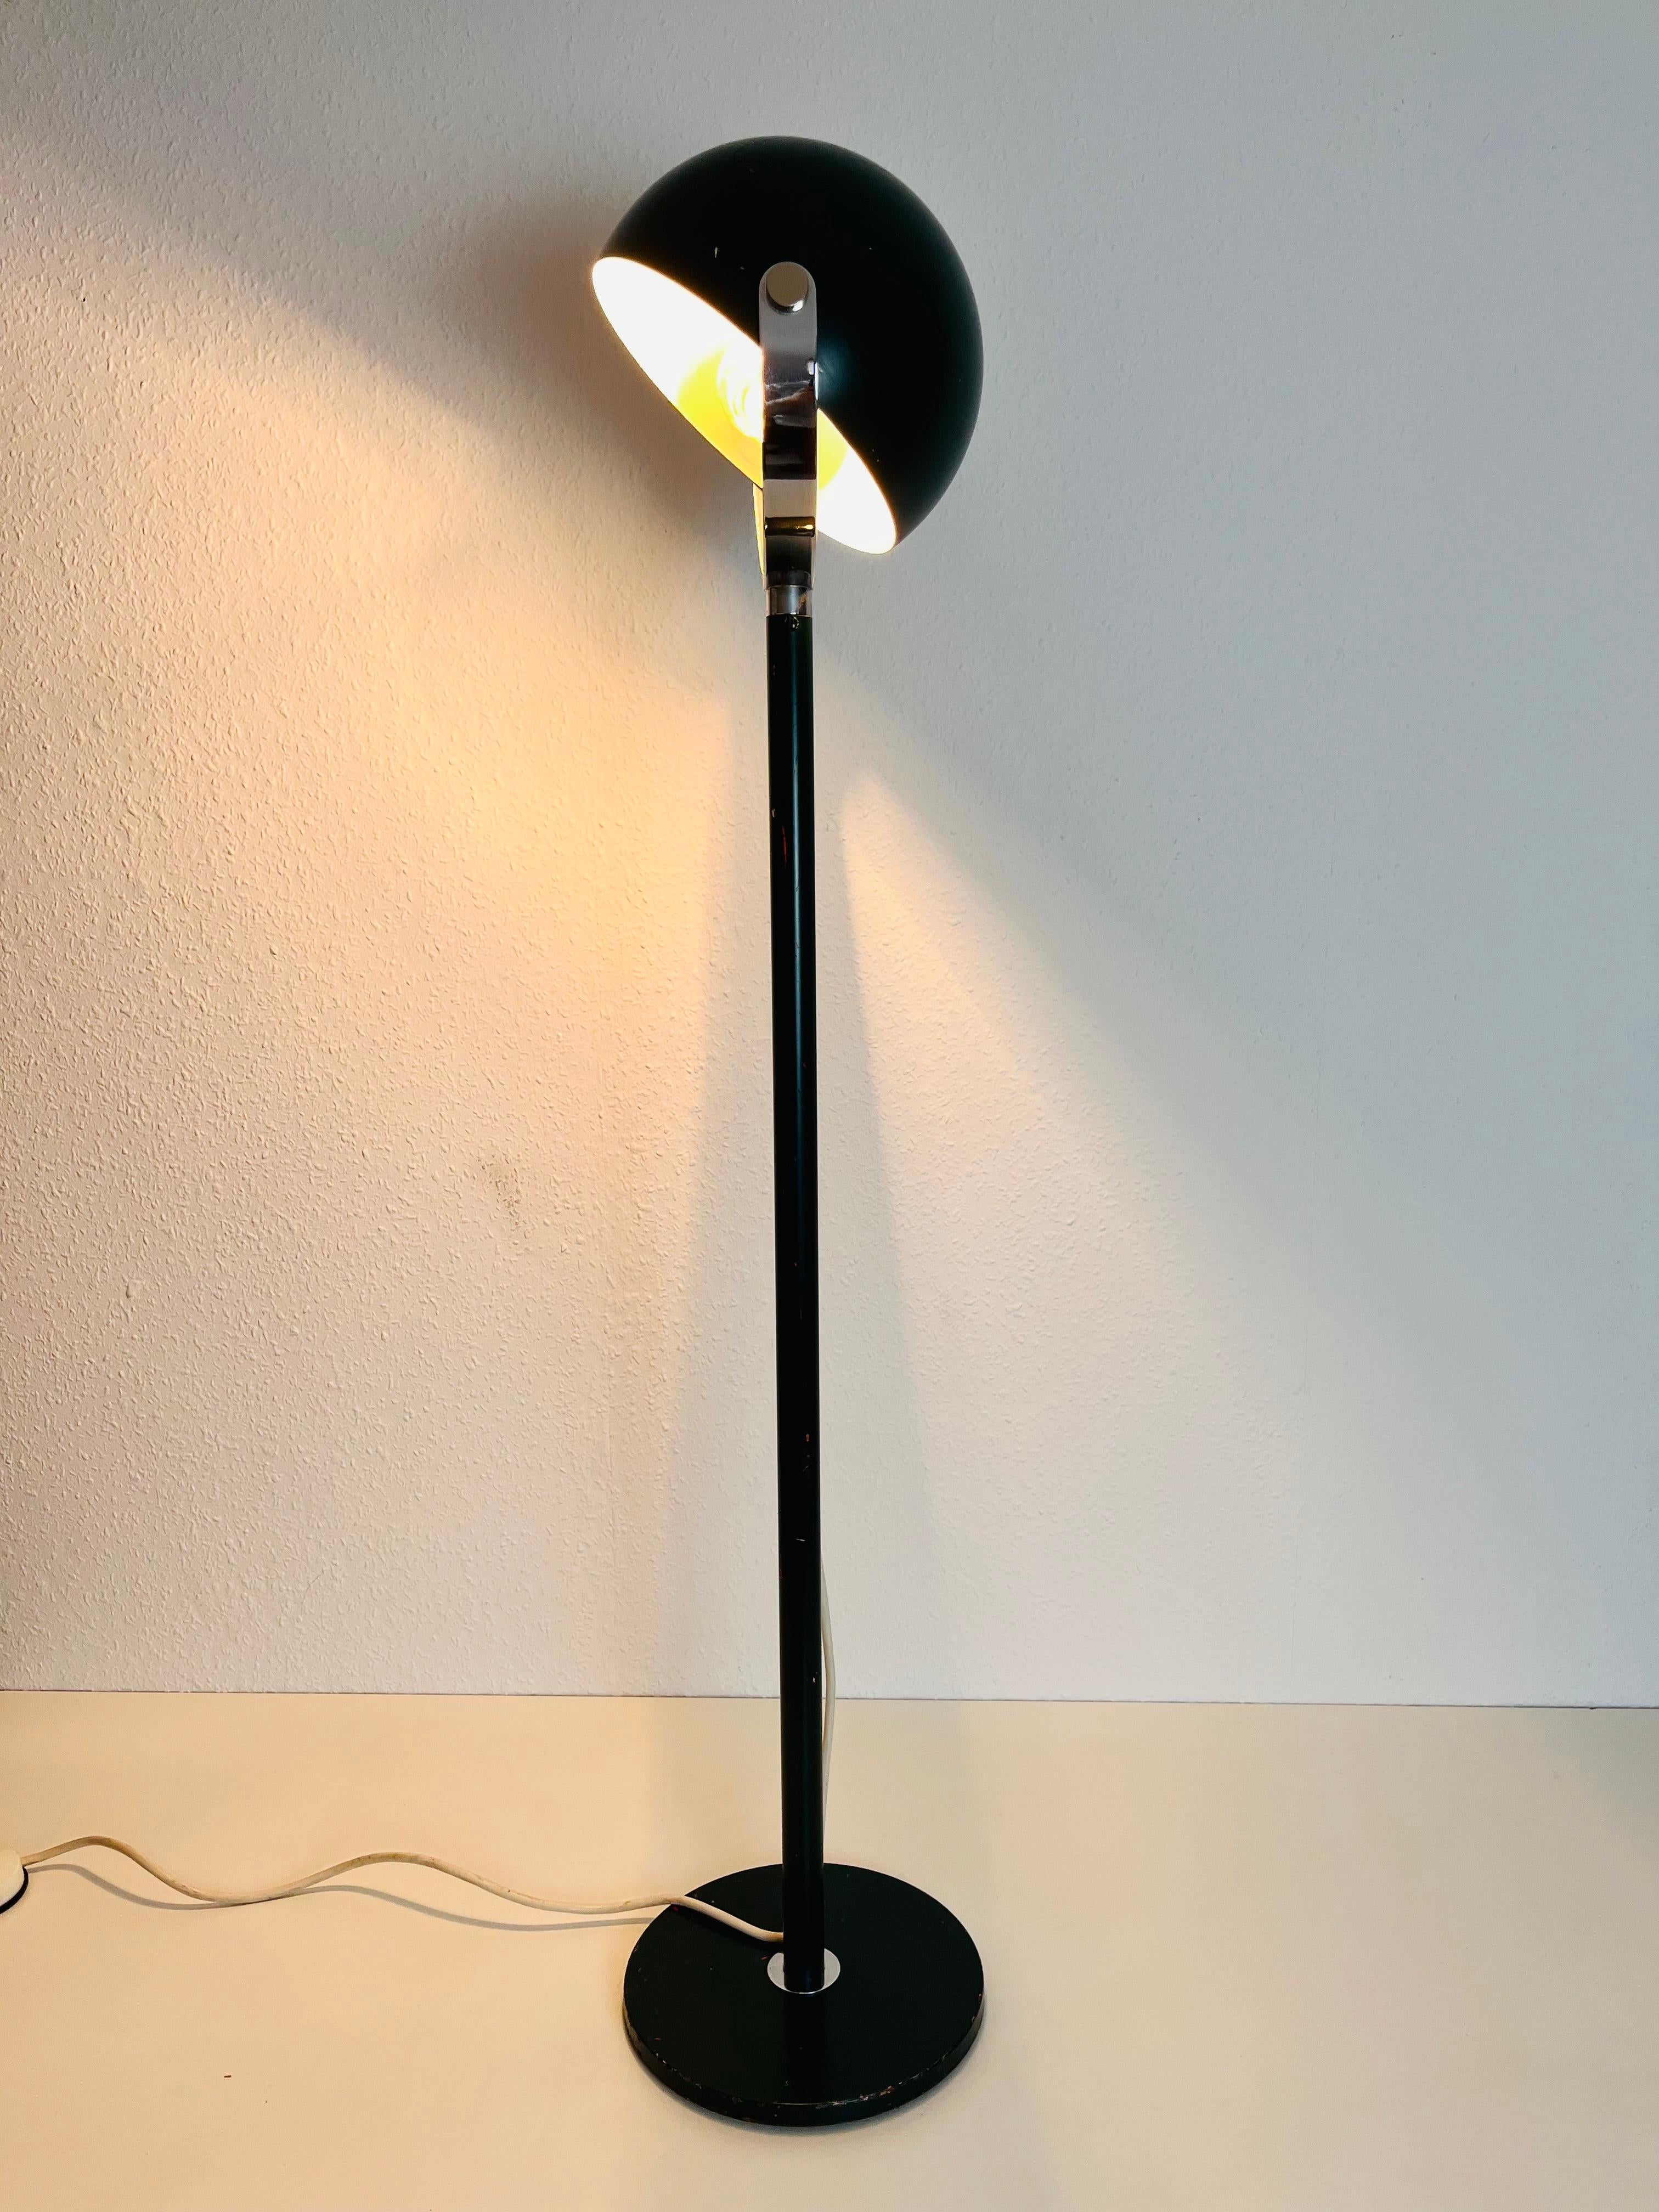 Midcentury Green Space Age Floor Lamp, Germany, 1960s For Sale 2